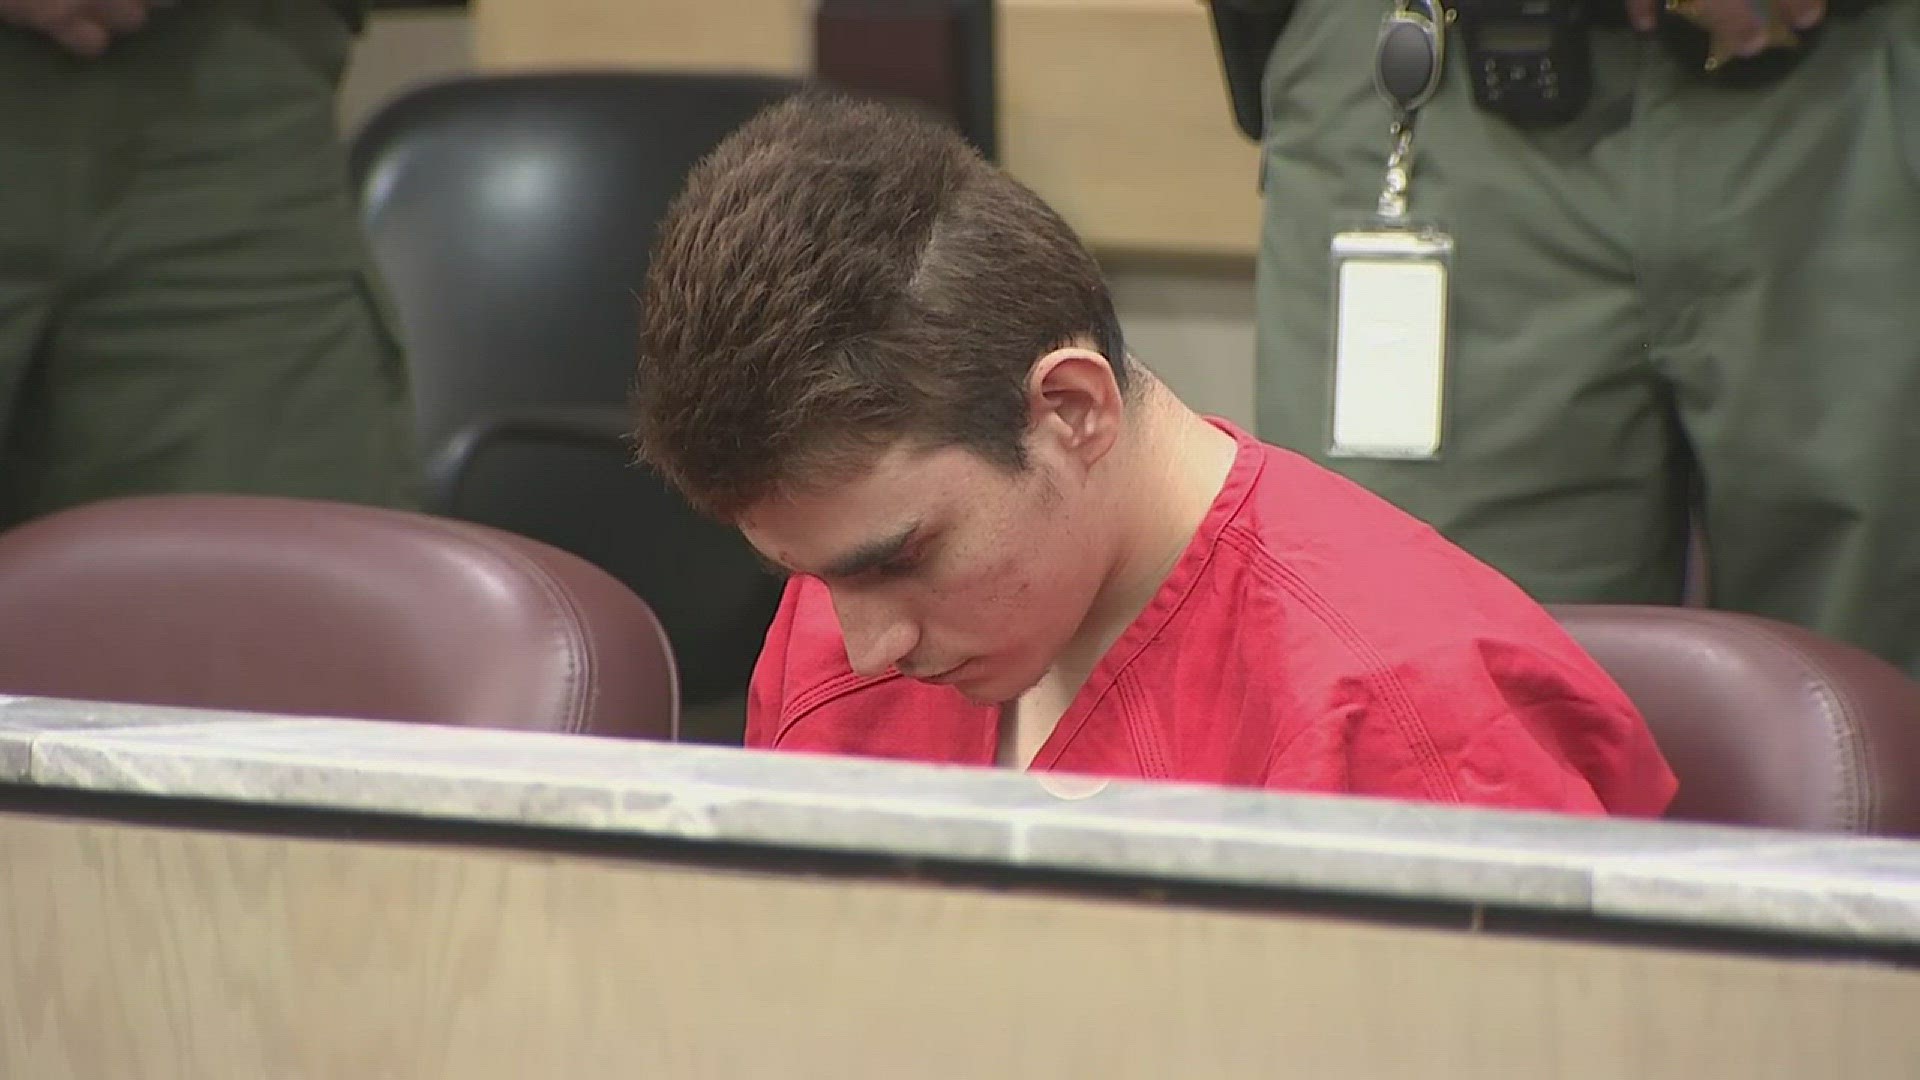 The alleged Parkland shooter had a hearing Wednesday in Fort Lauderdale.